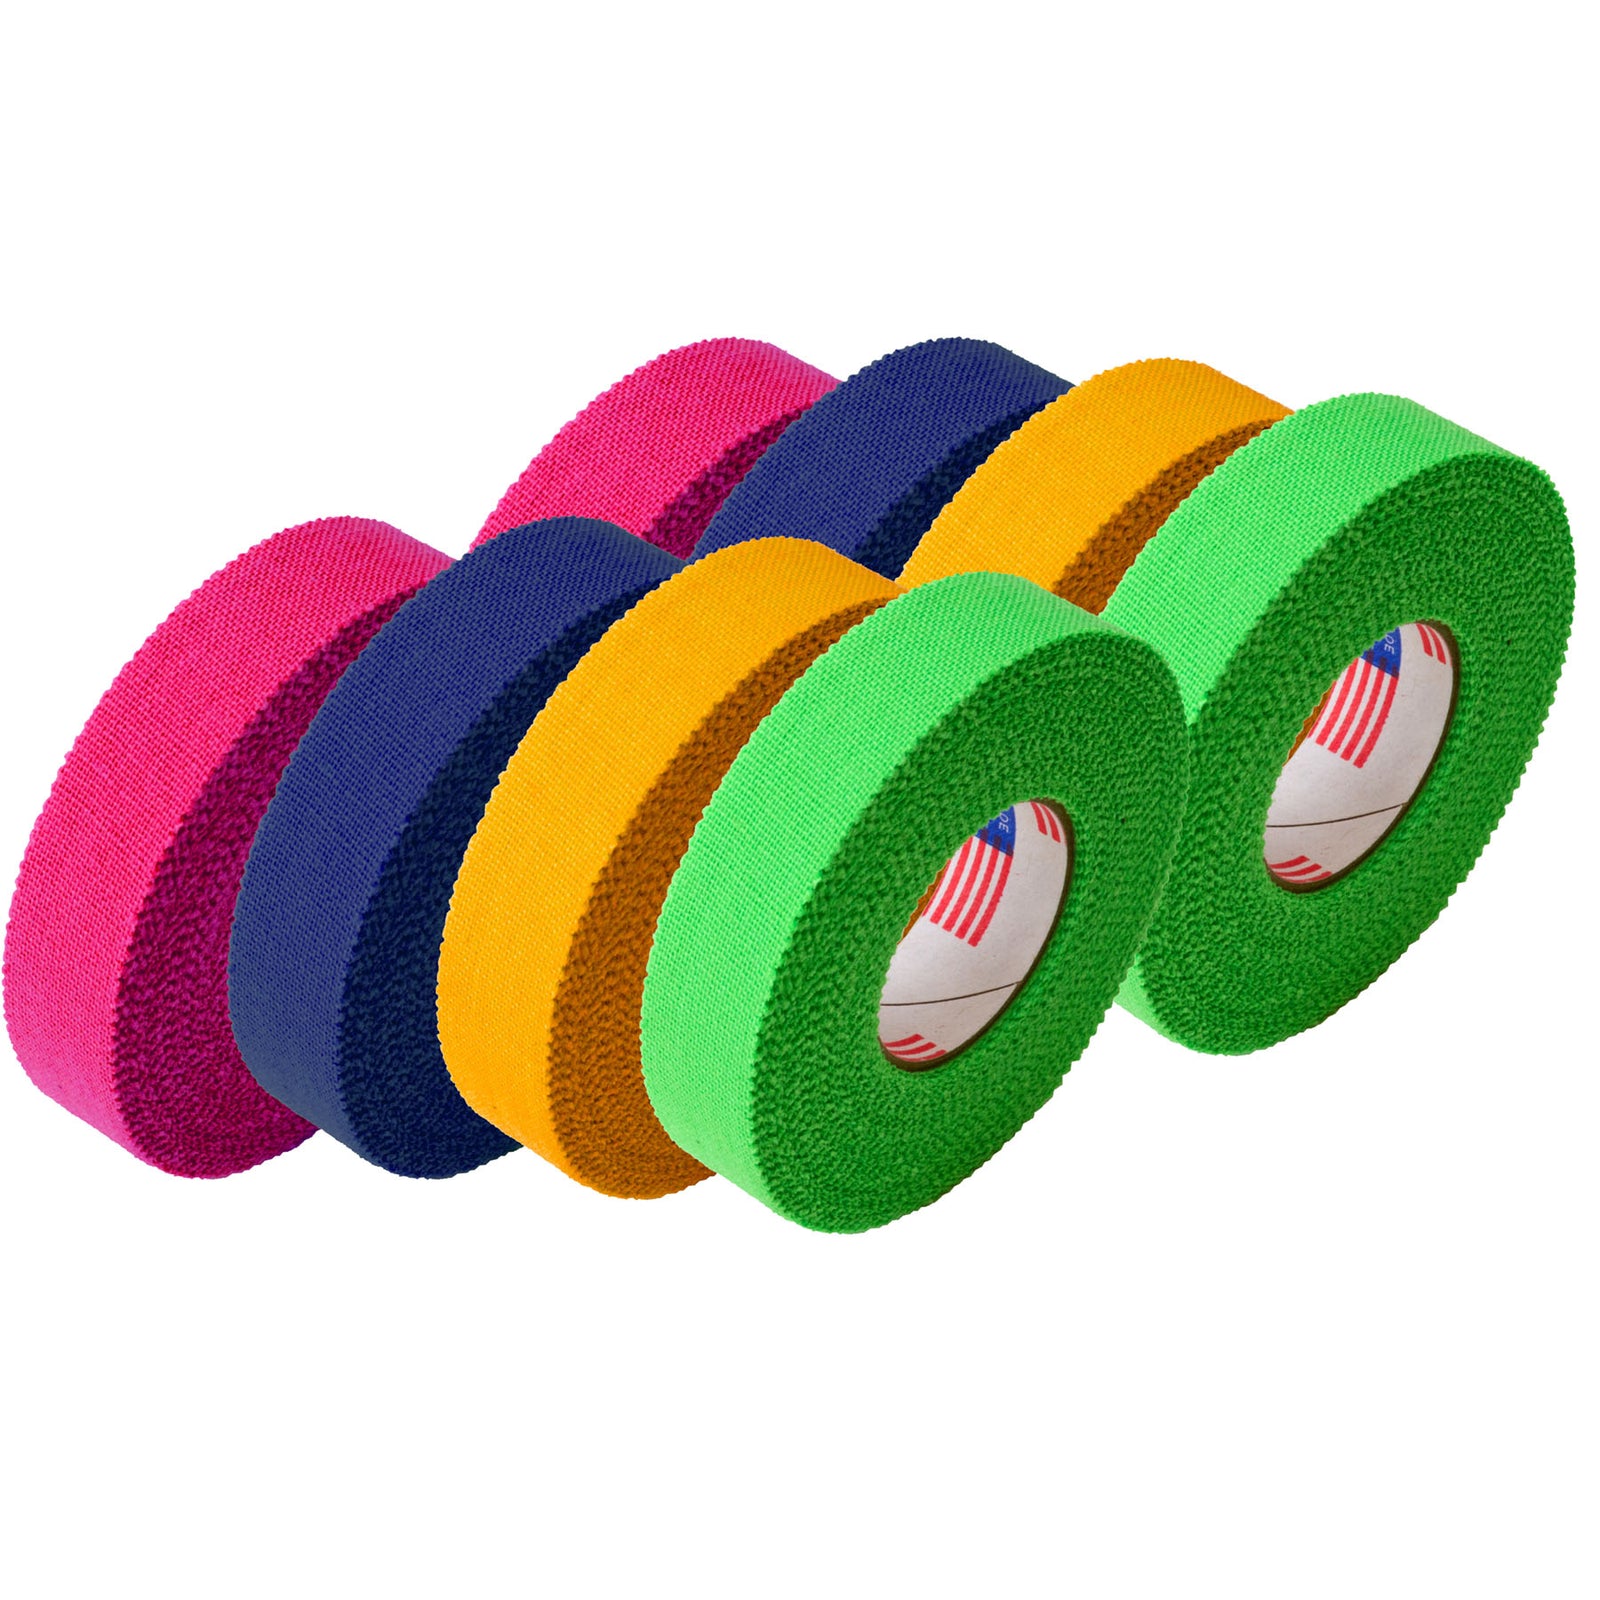 a photo of all the colors of metolius finger tape